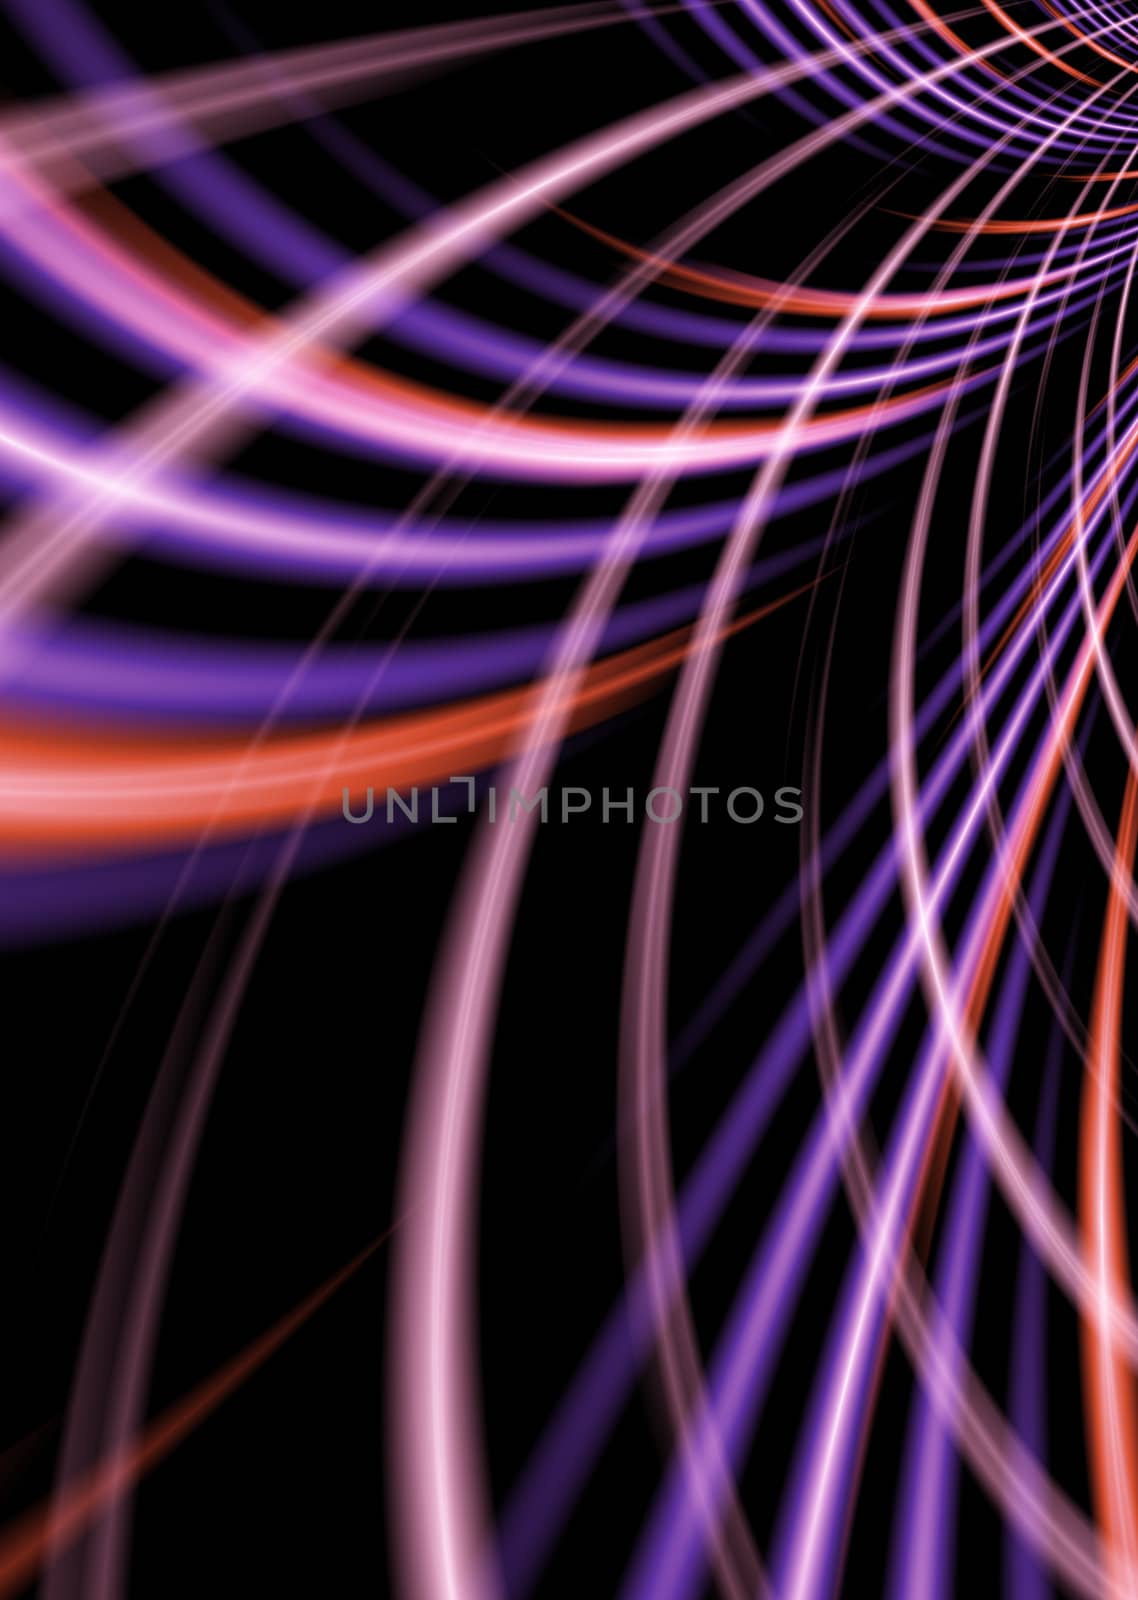 Neon abstract background with flowing lines in purple and red